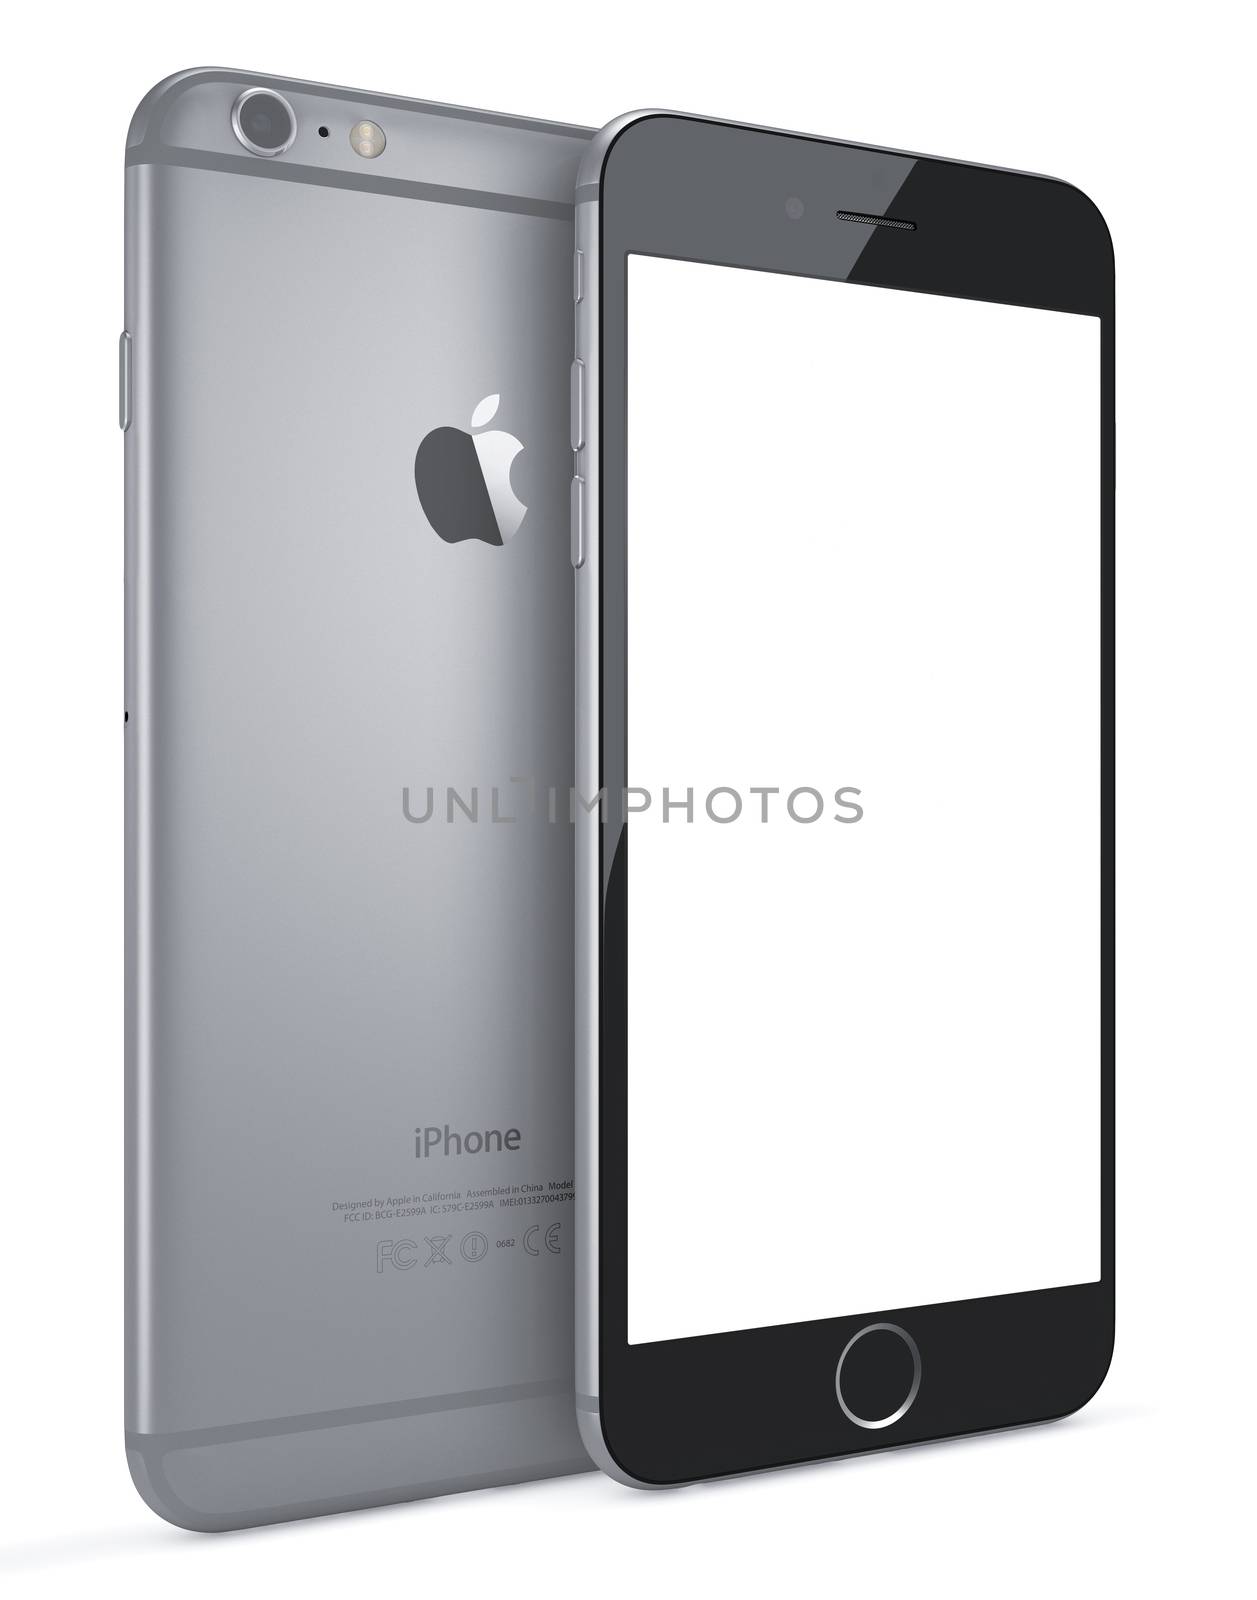 Phone 6 Plus with blank screen by manaemedia